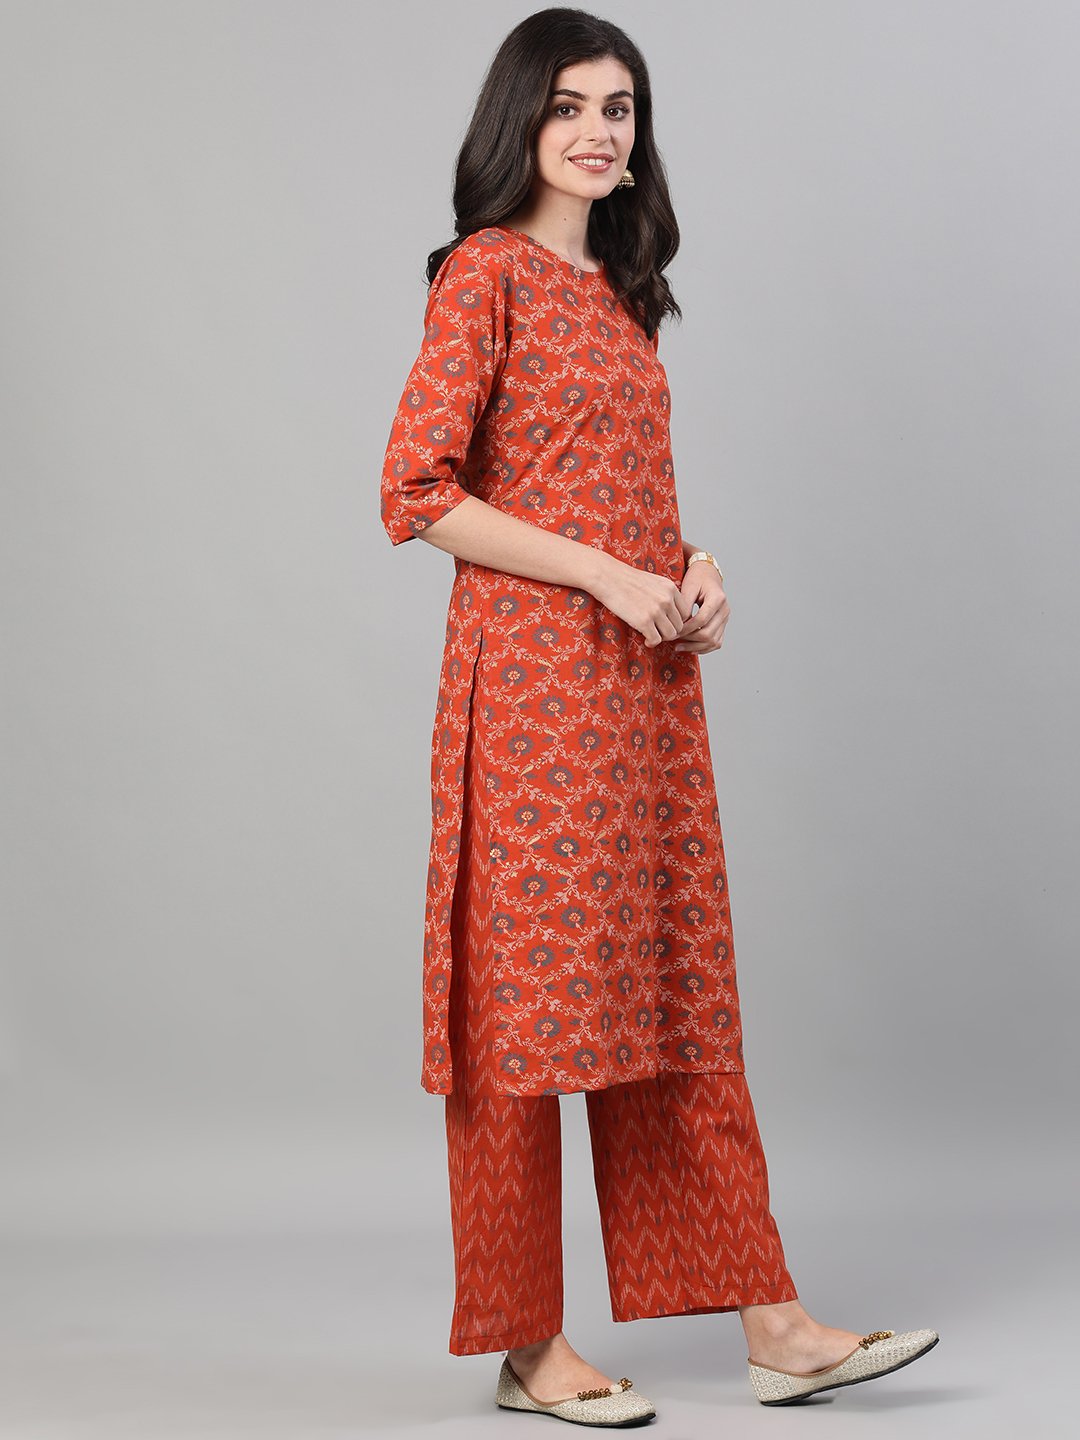 Women's Rust Gold Printed Three-Quarter Sleeves Straight Kurta With Palazzo And Dupatta With Pockets And Face Mask - Nayo Clothing